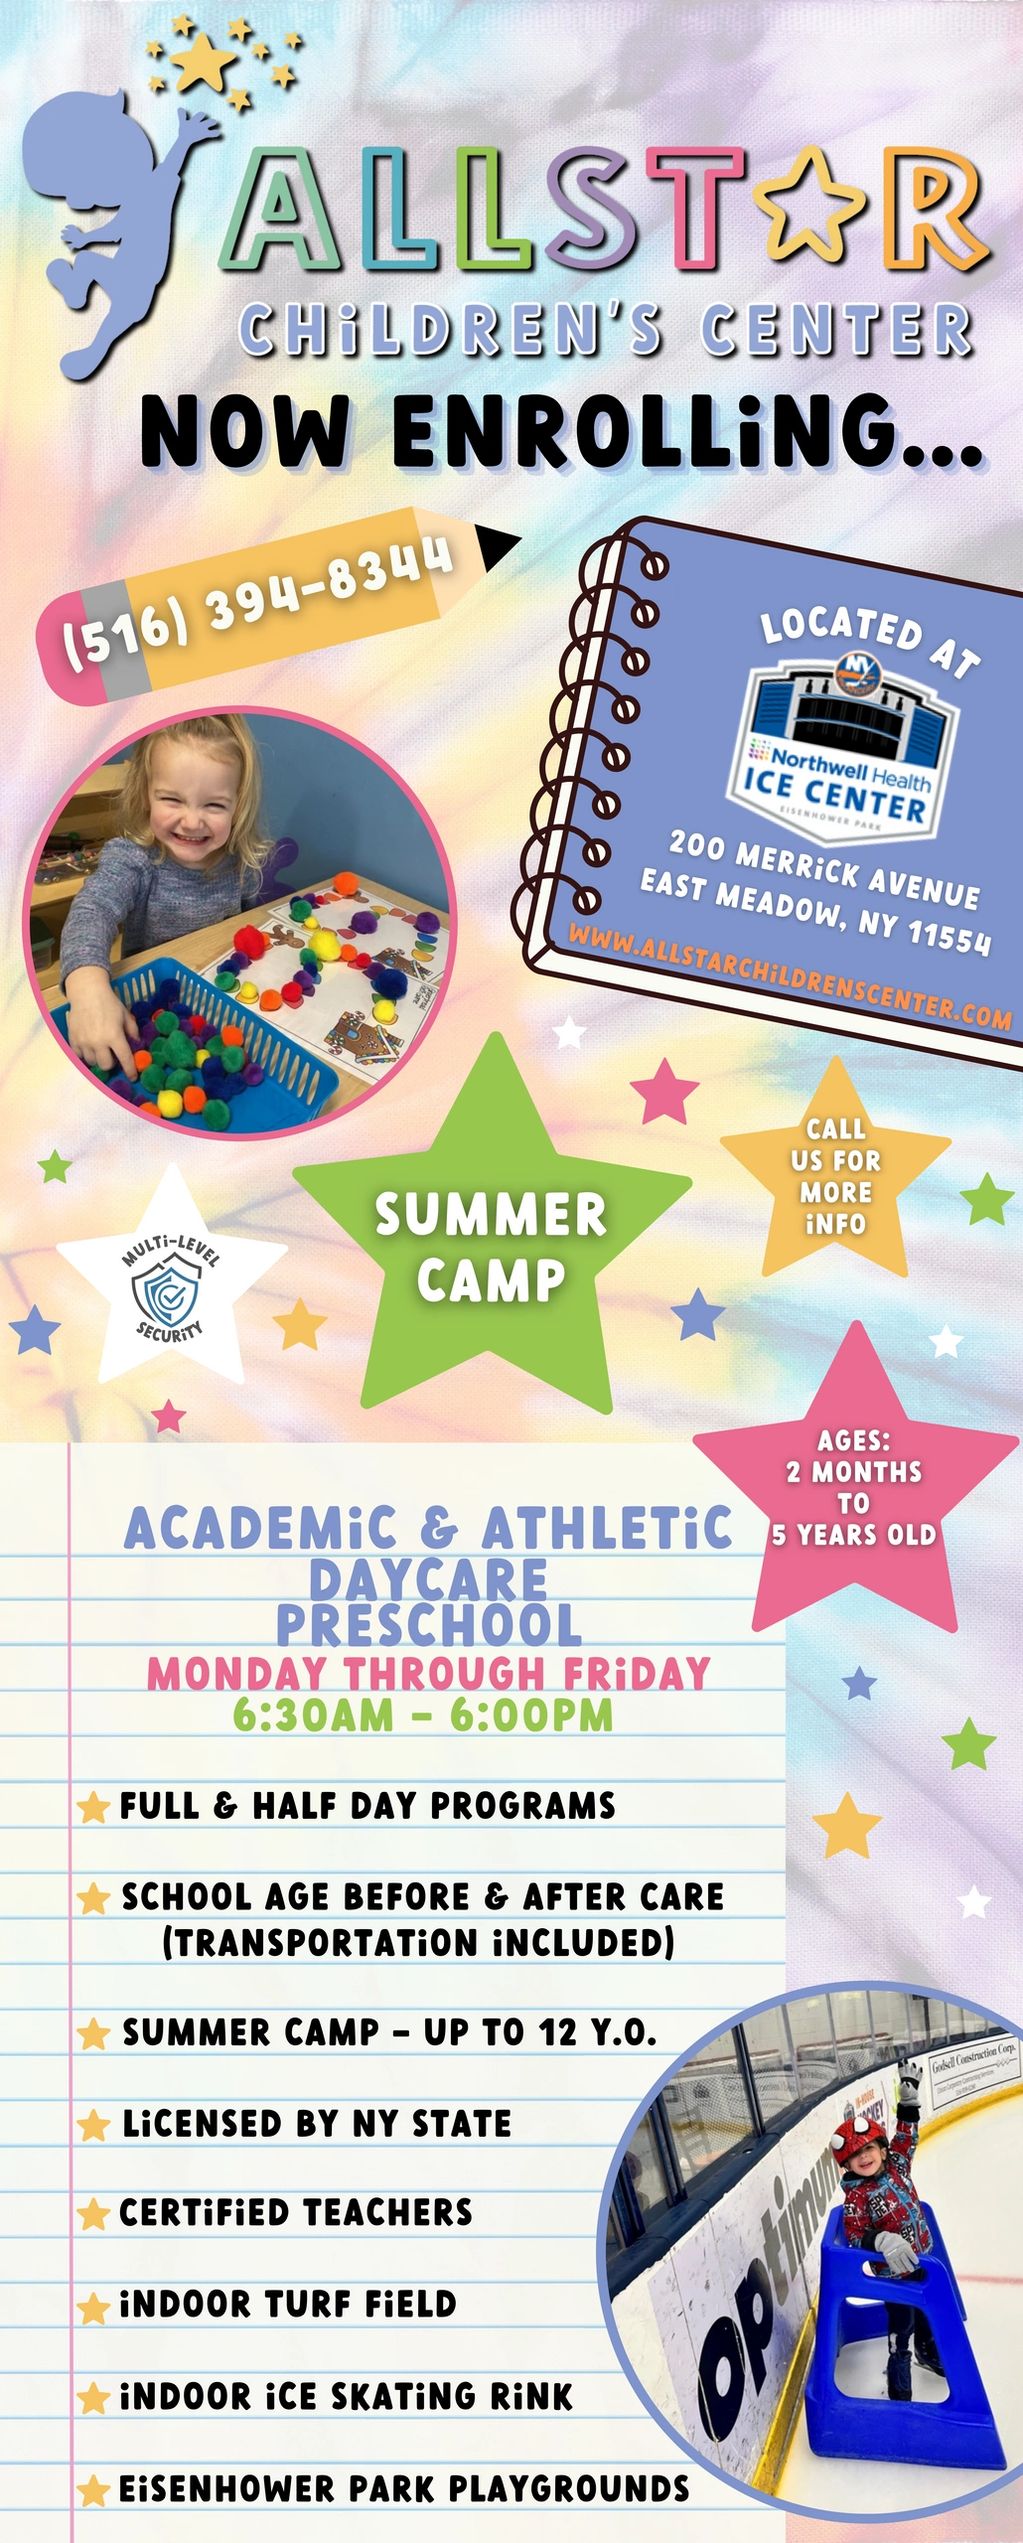 Summer Camp Registration is now OPEN☀️
Secure your spot now!

